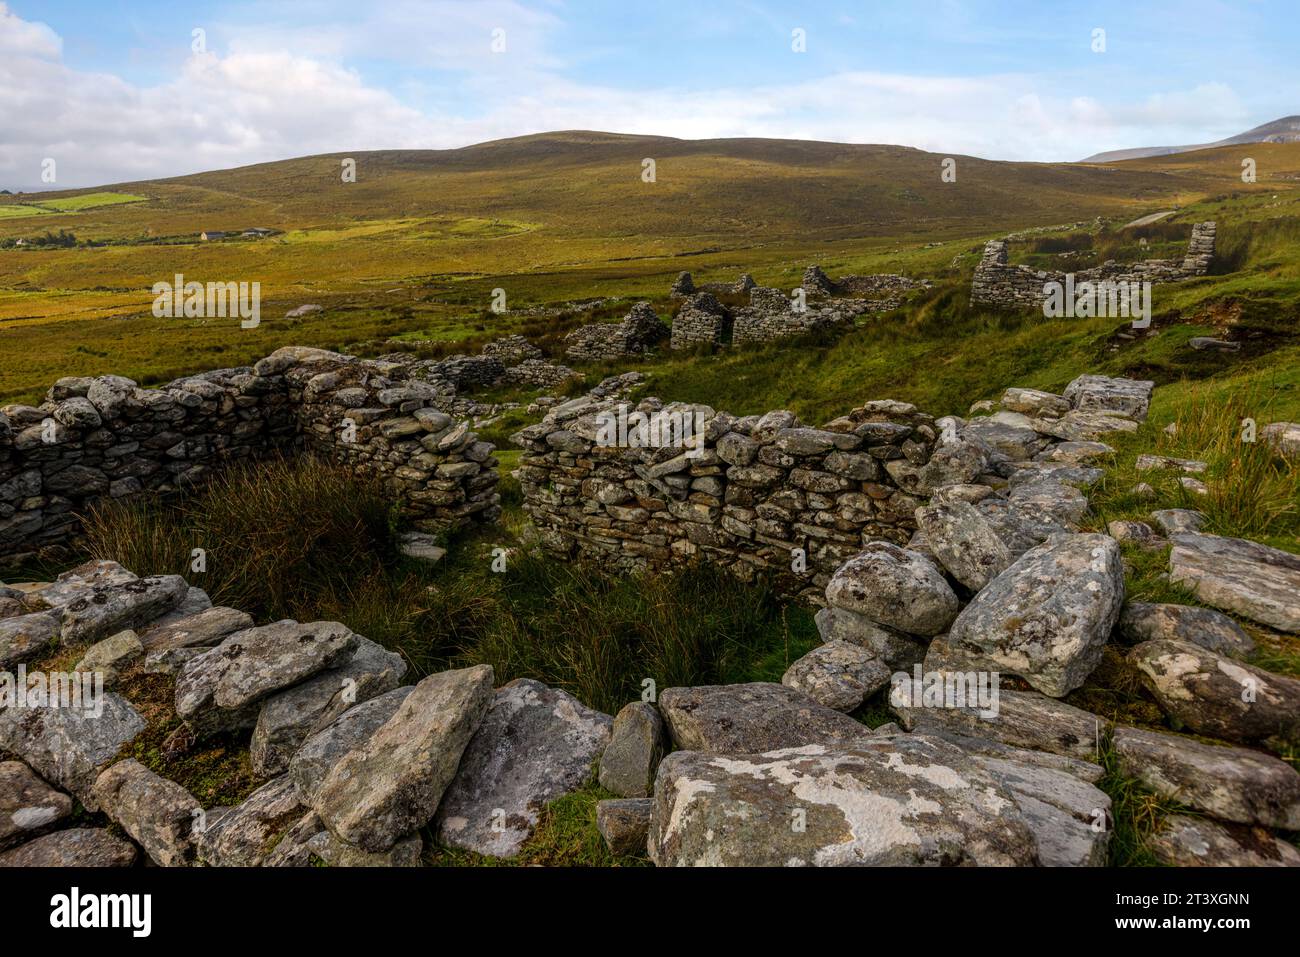 Slievemore Deserted Village is a protected archaeological site and a popular tourist destination, offering visitors a glimpse into traditional Irish l Stock Photo